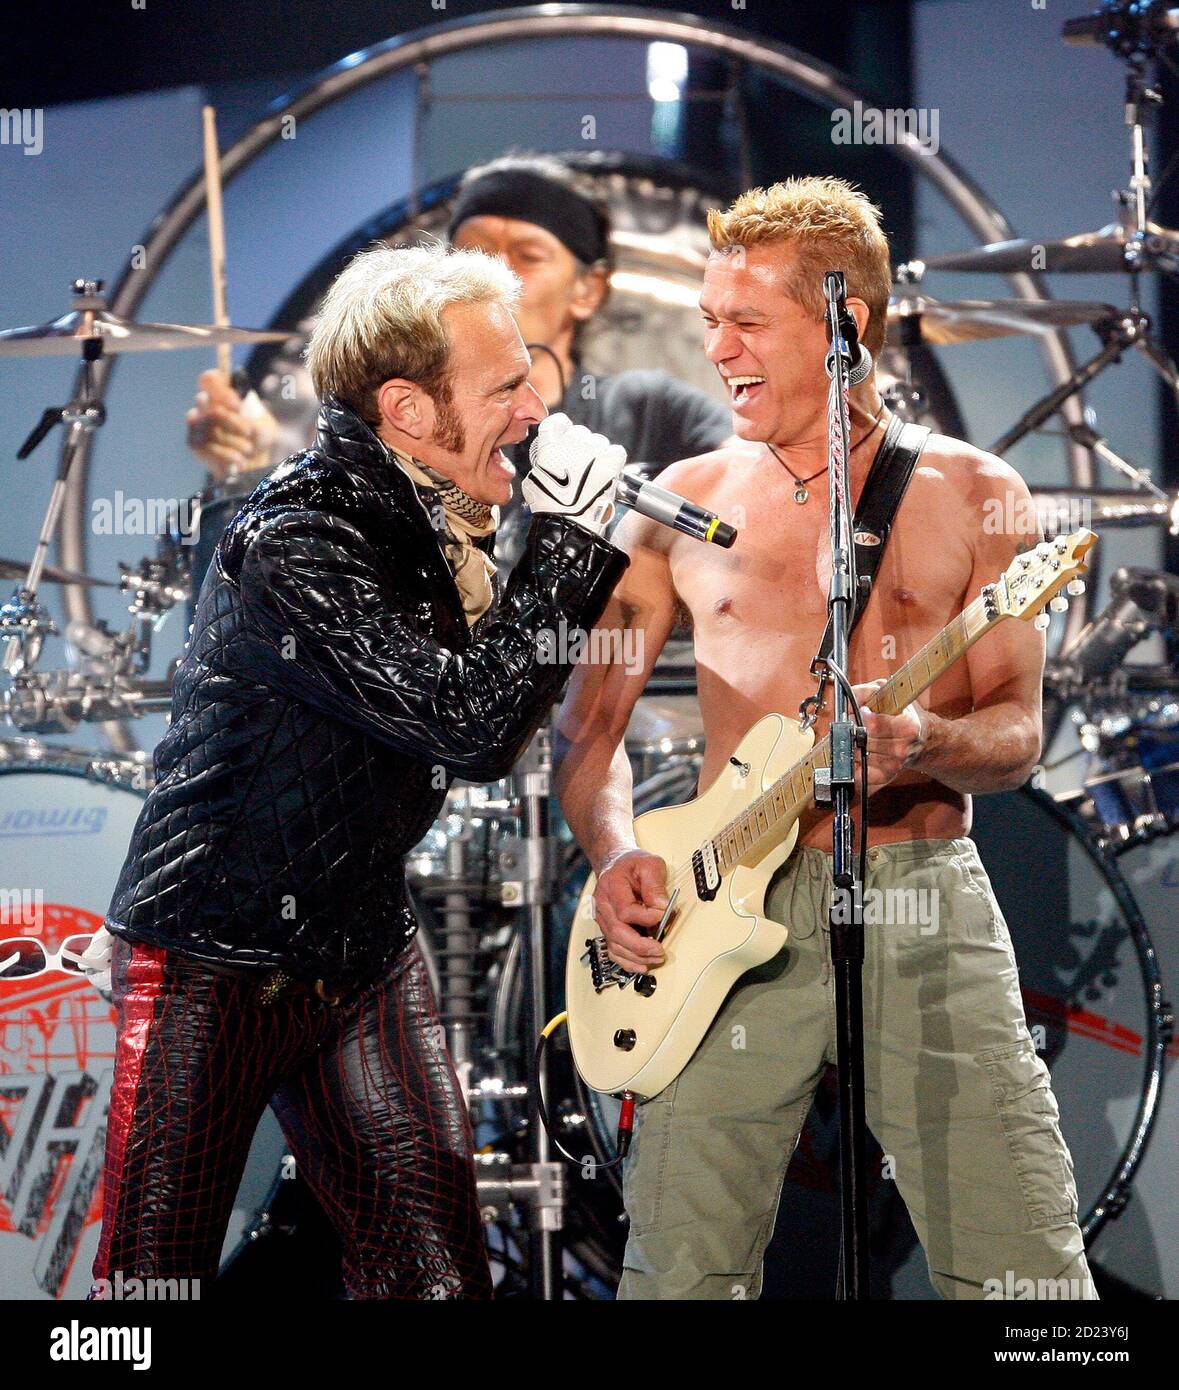 David Lee Roth (L) and Eddie Van Halen of Van Halen perform at Tiger Jam XI in Las Vegas April 19, 2008. Tiger Jam, an AT&T sponsored event, is a fundraiser for the Tiger Woods Foundation which funds a variety of youth programs.  REUTERS/Mario Anzuoni   (UNITED STATES) Stock Photo